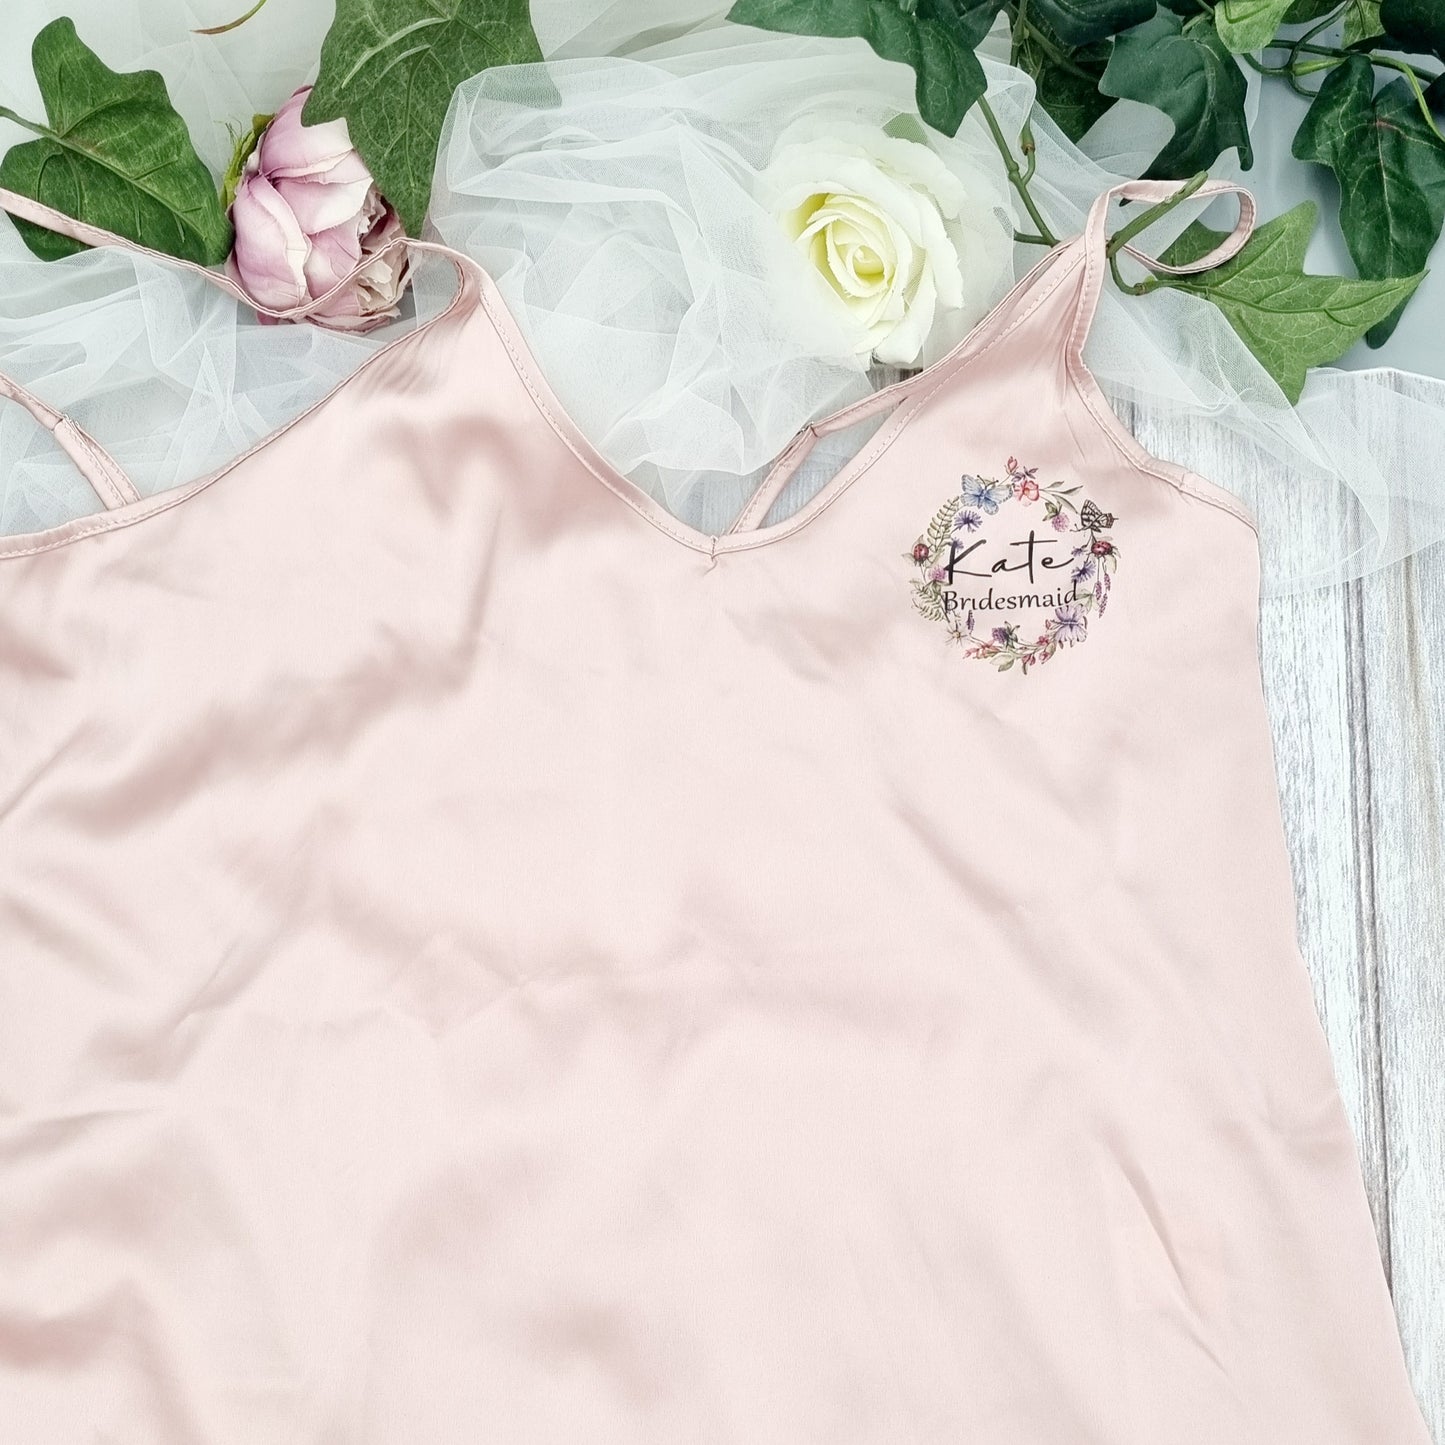 Dusty Rose Cami Set with Kate Bridesmaid